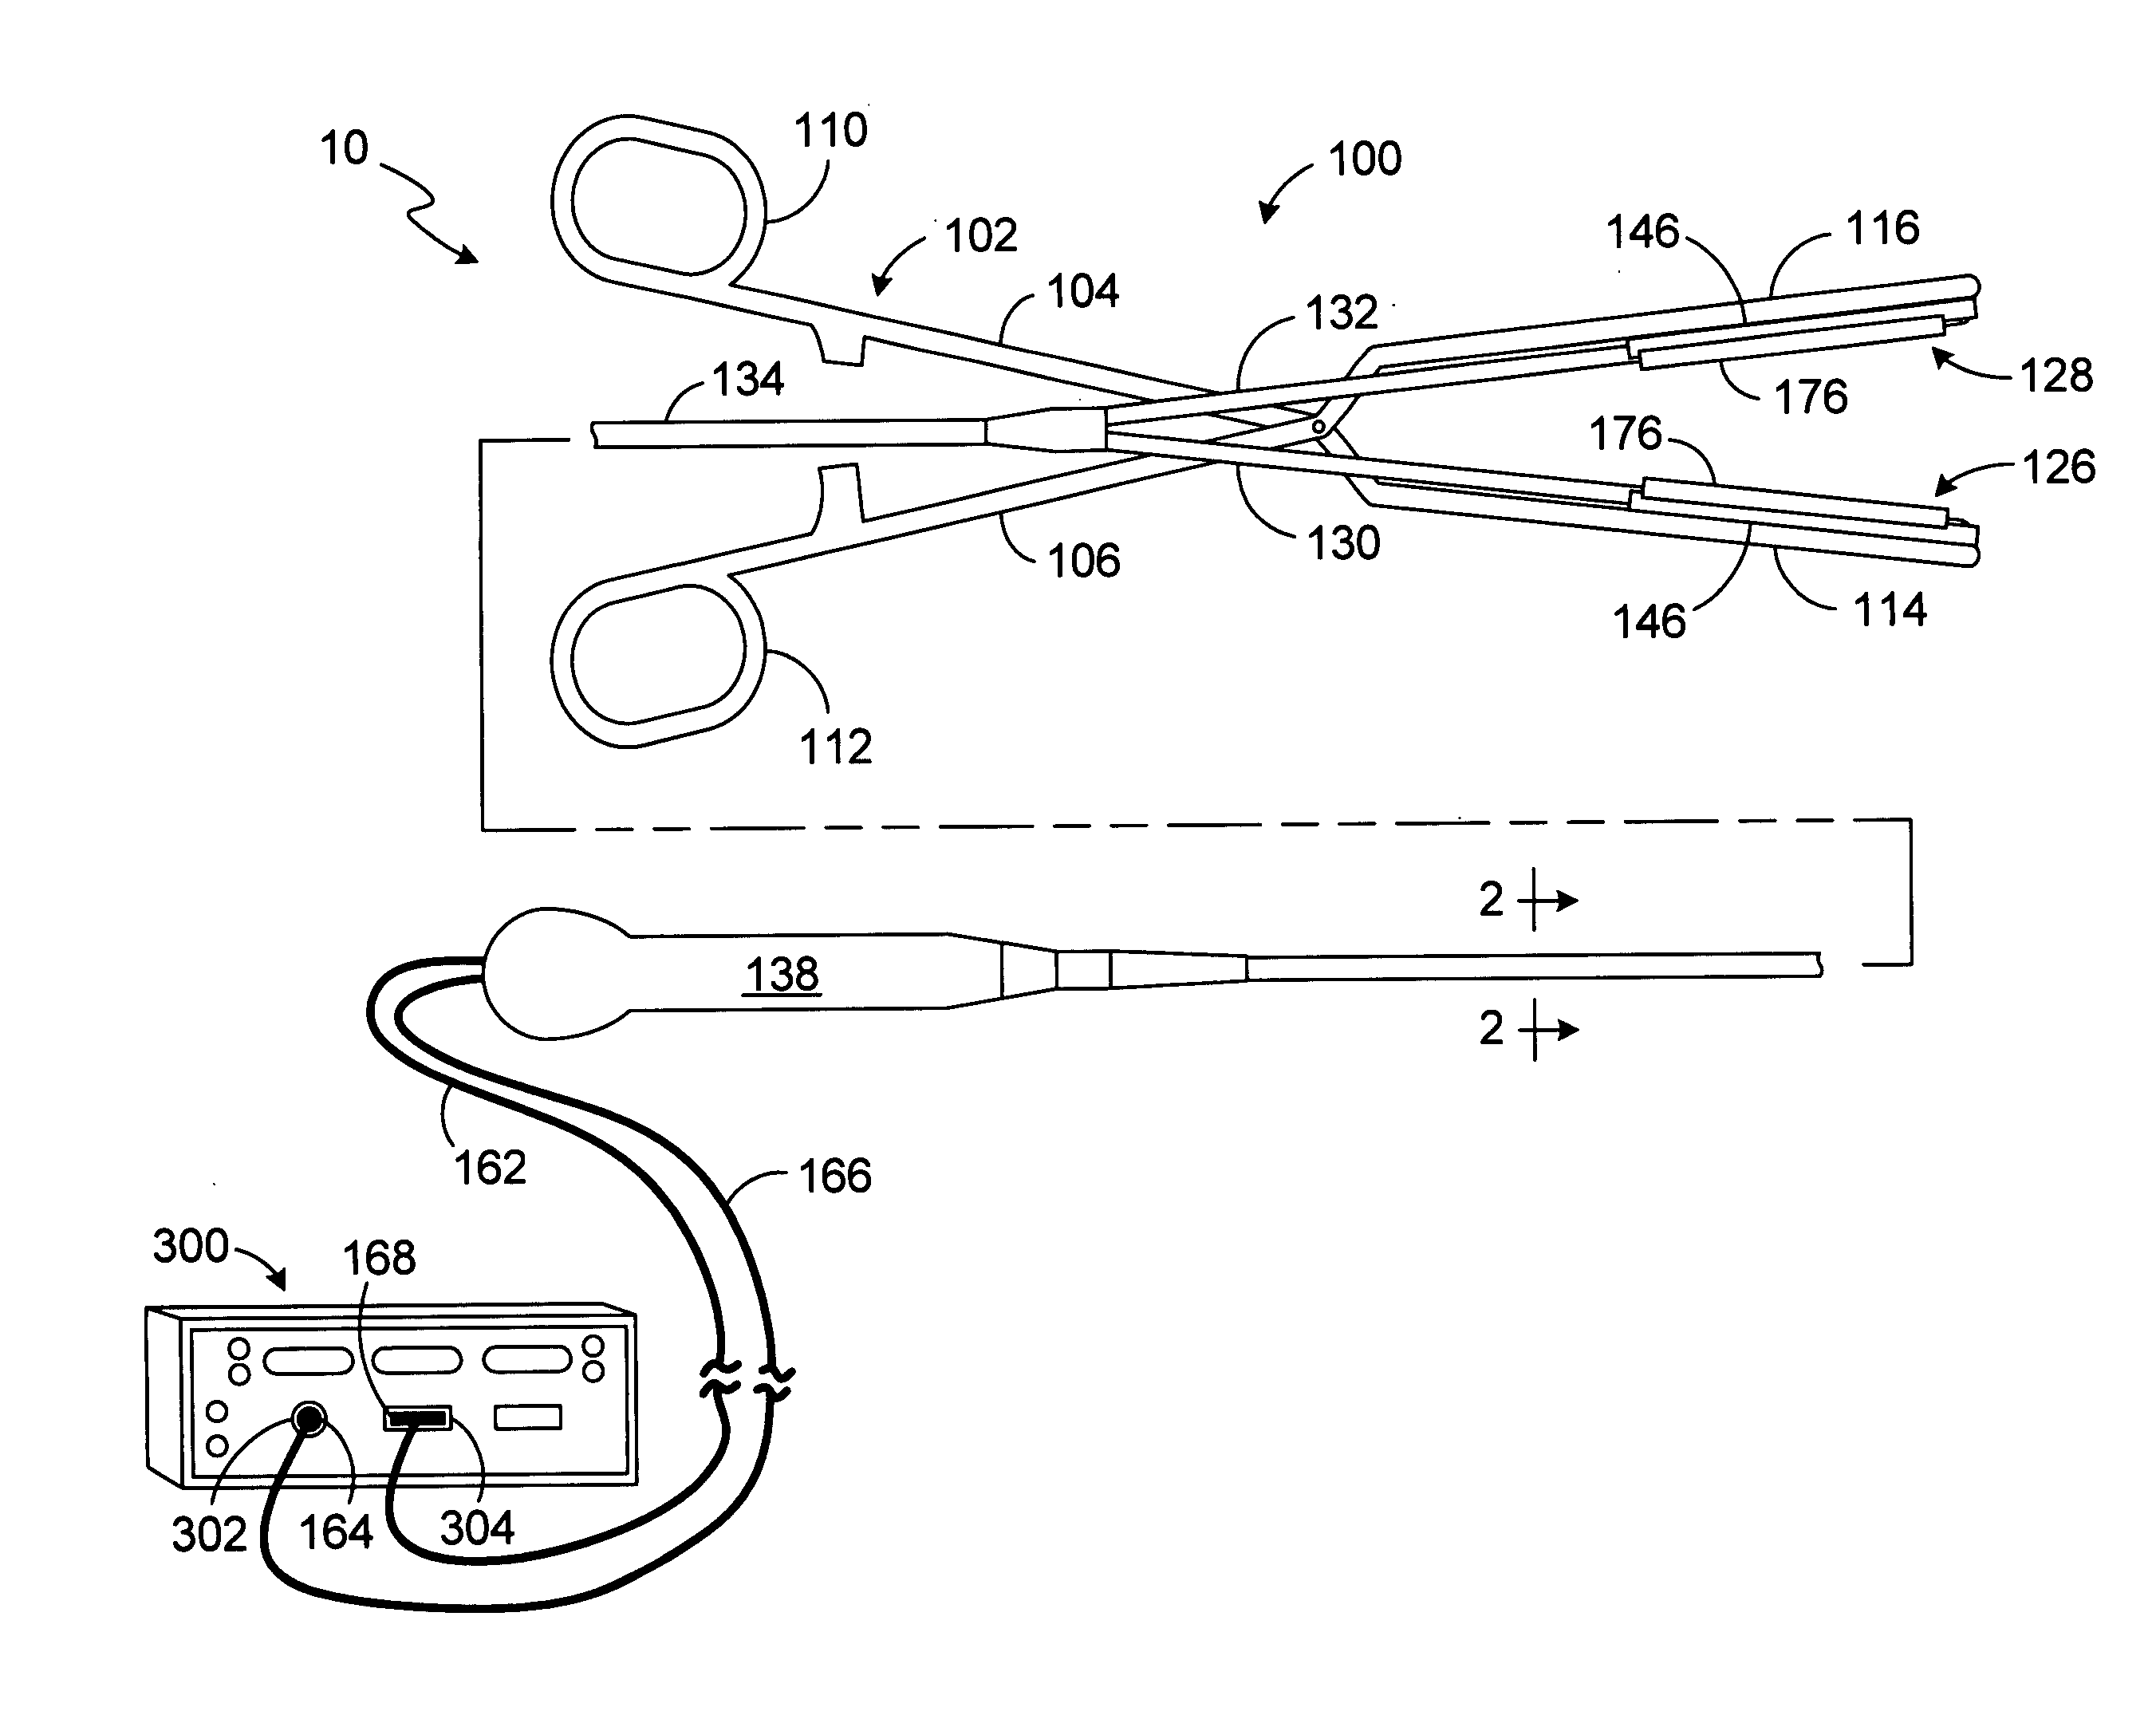 Clamp based lesion formation apparatus with variable spacing structures